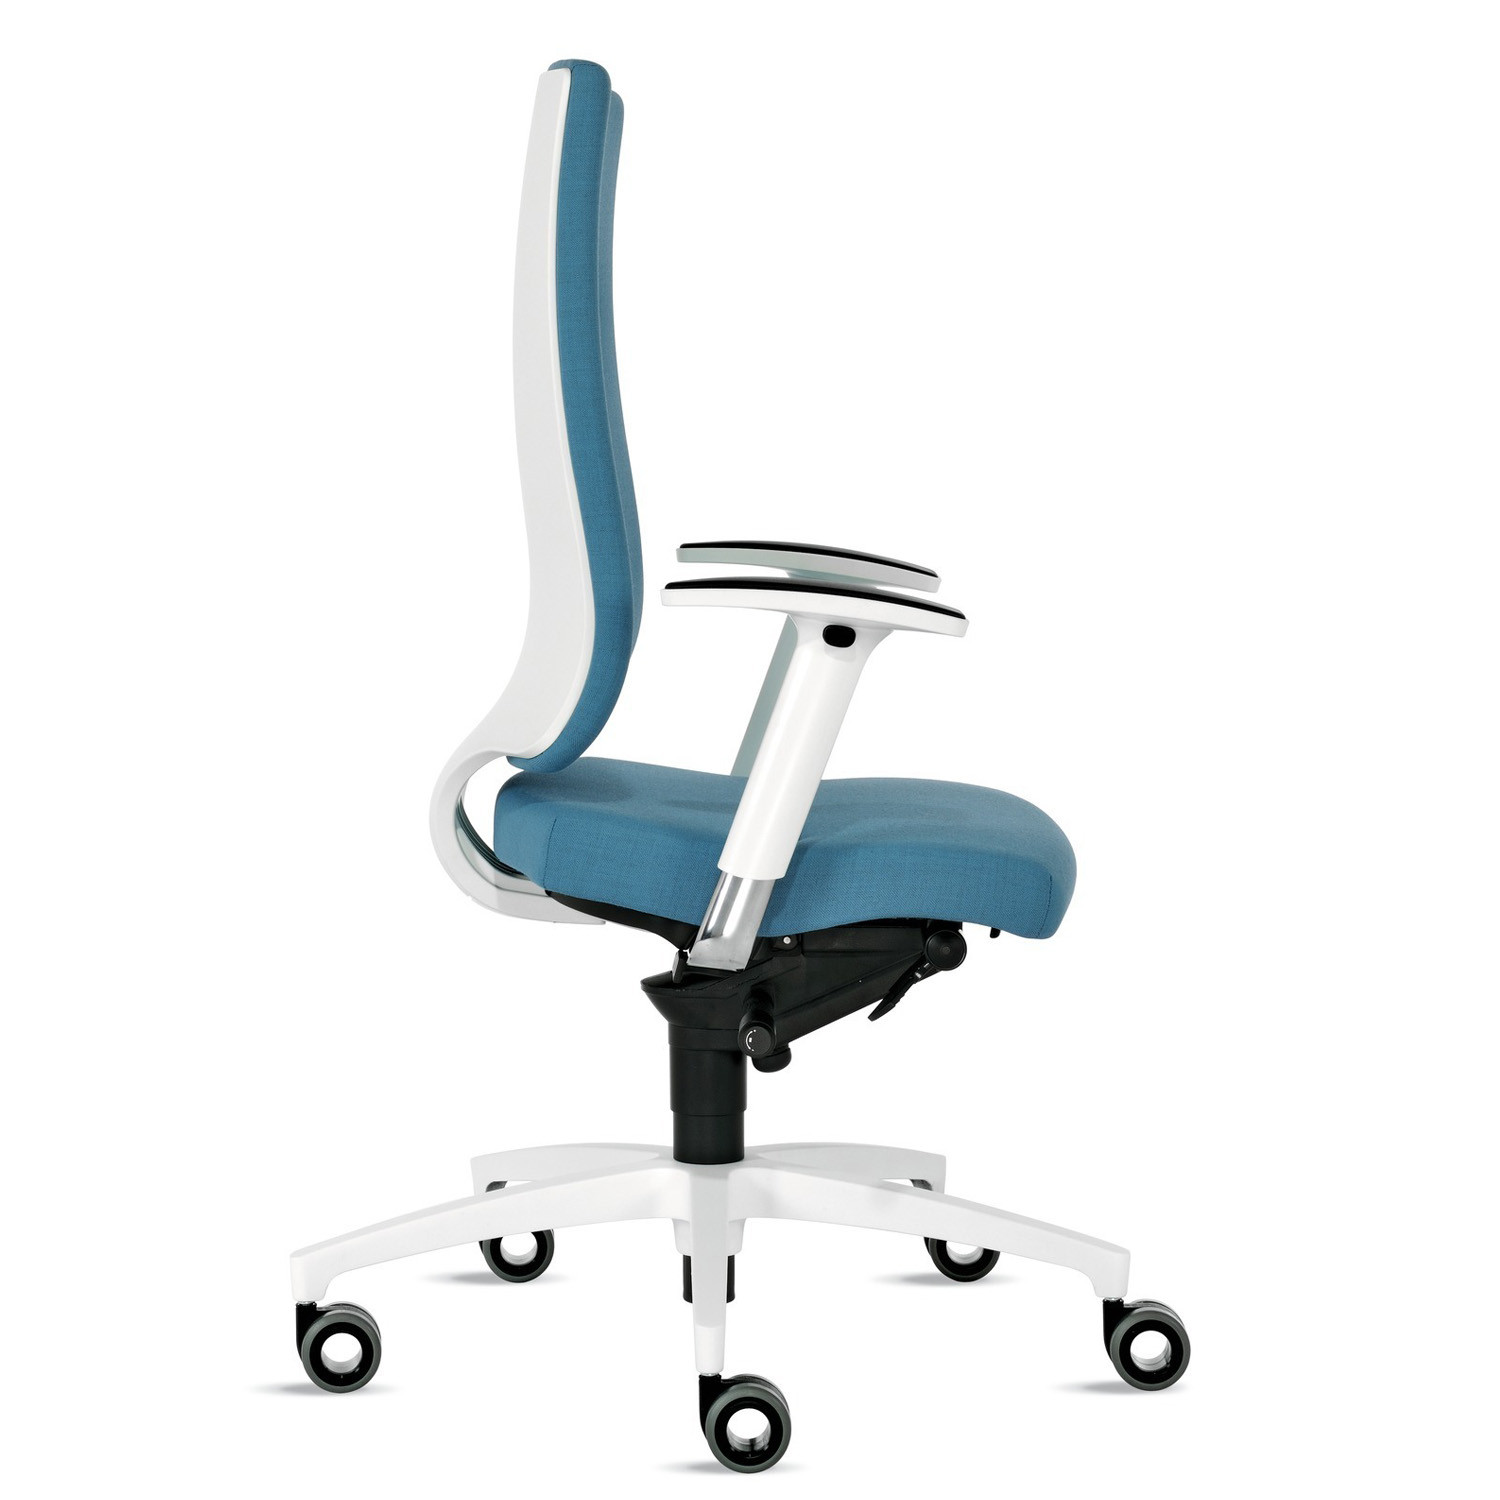 In Touch White Office Chair by Ballendat